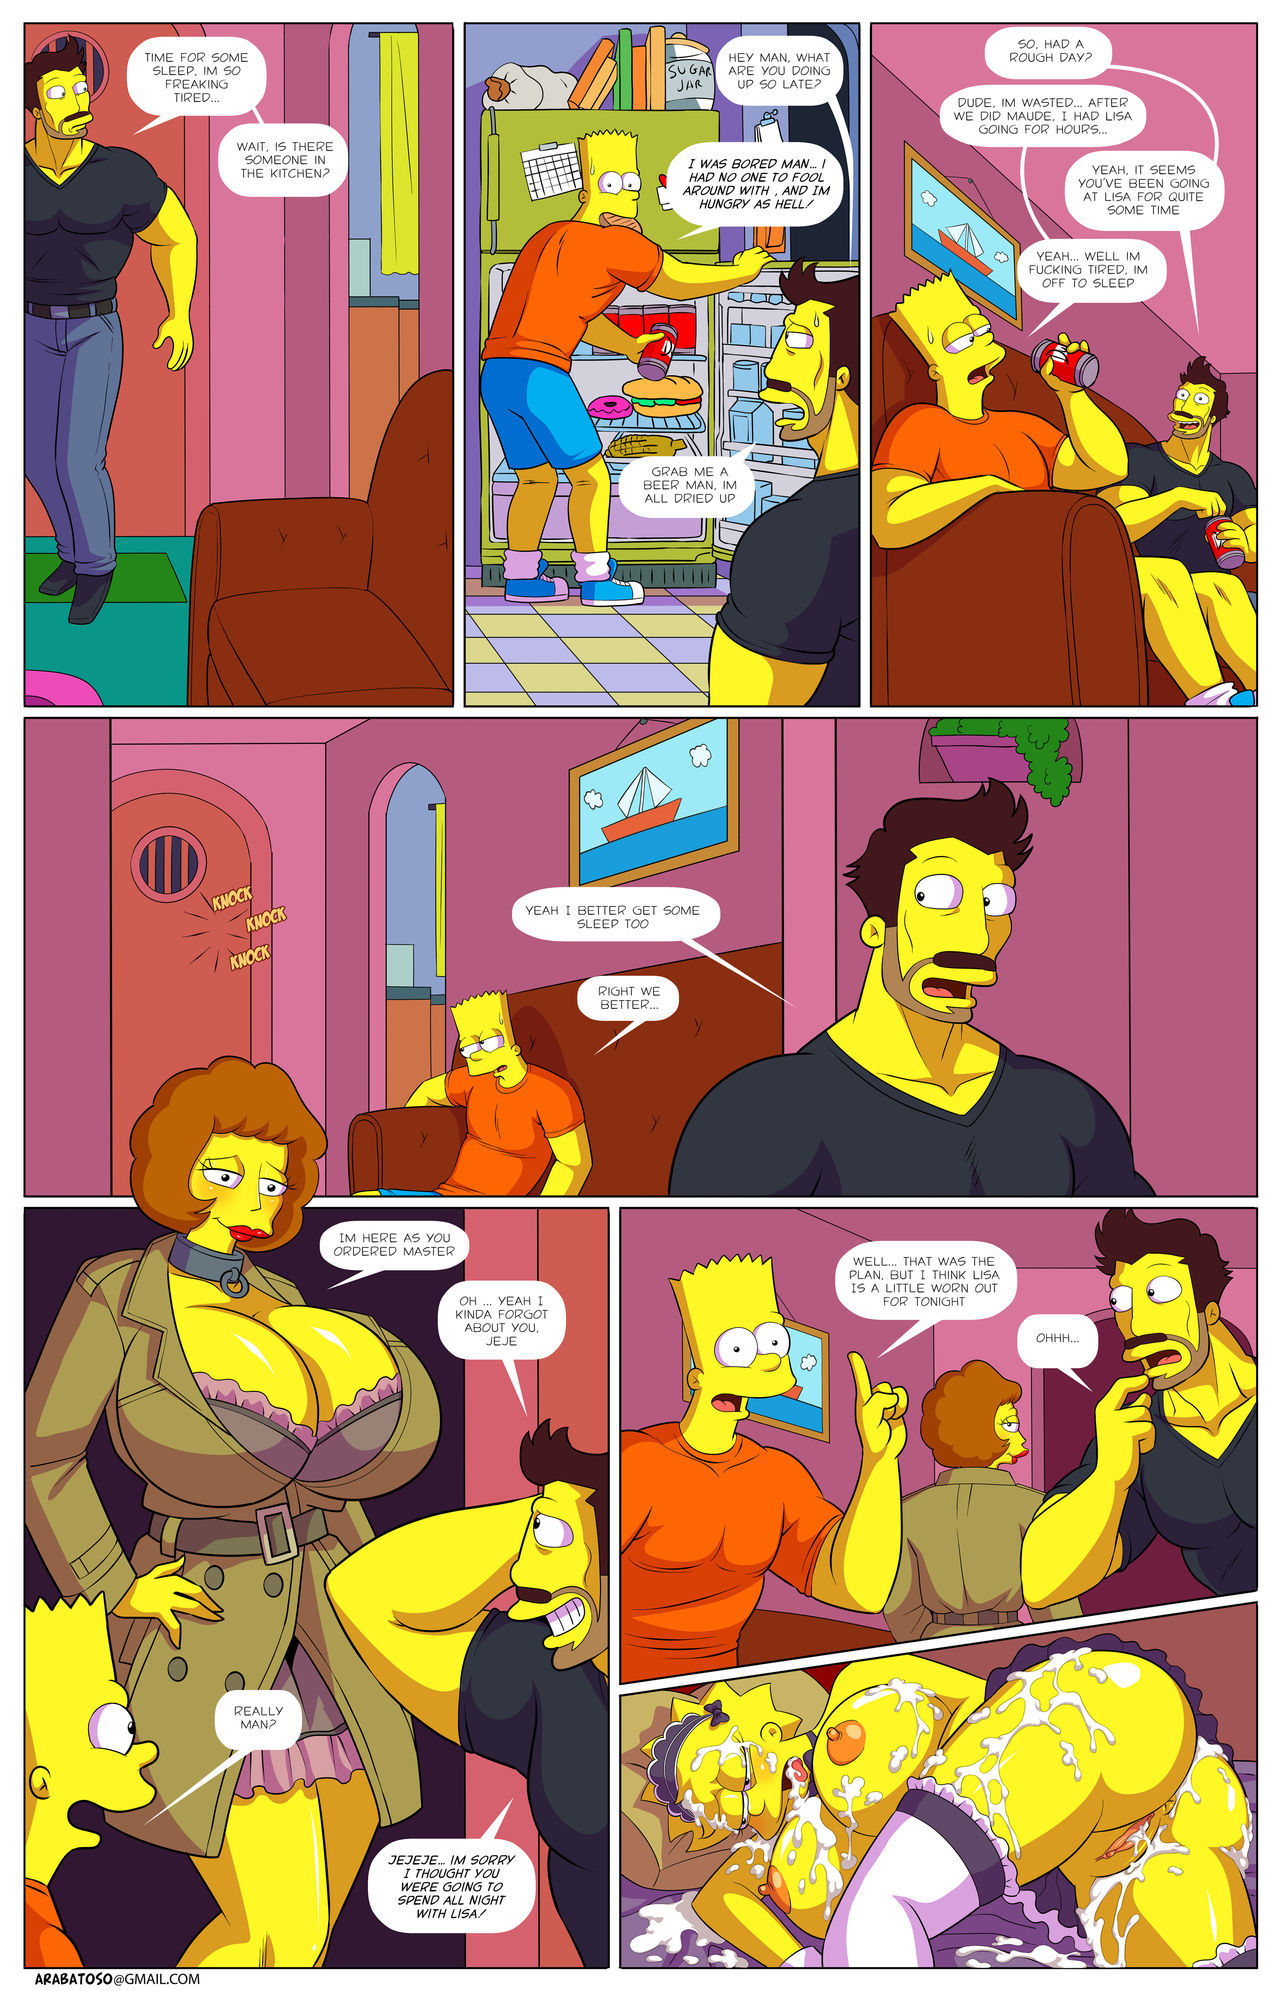 Darrens Adventure - Jenny Poussins Chapter page 8